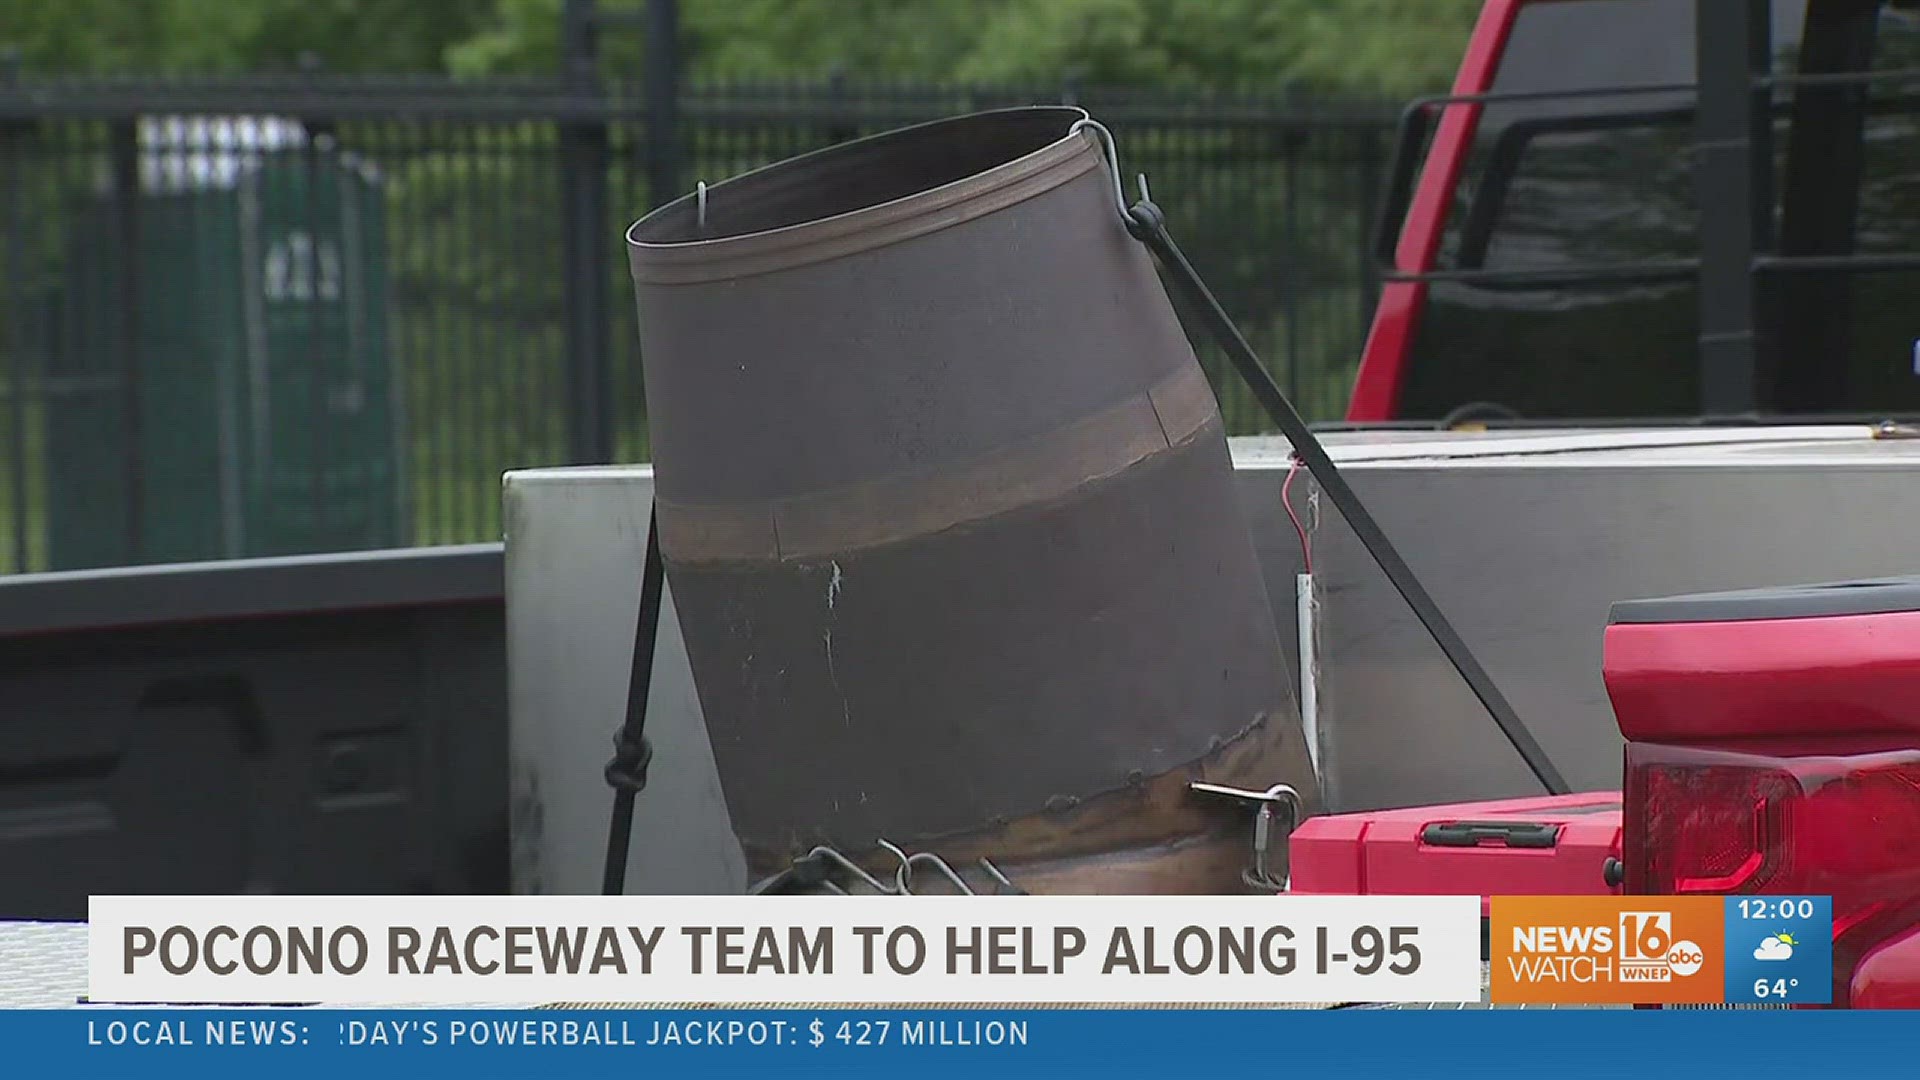 The dryer that is used to dry the racetrack is heading down to assist on I-95.